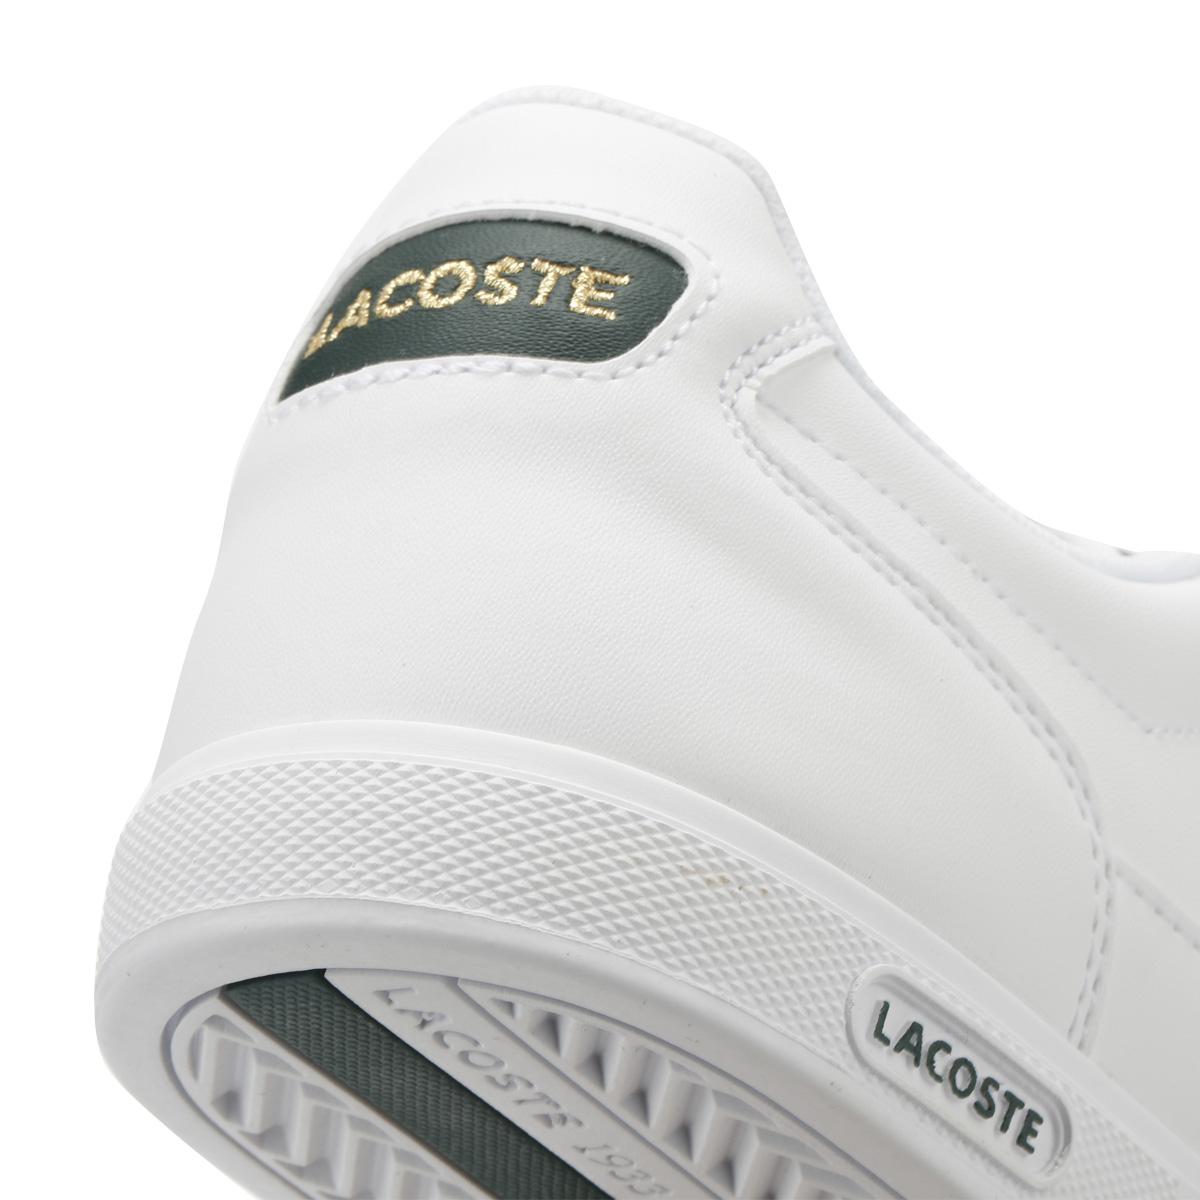 lacoste europa trainers in white